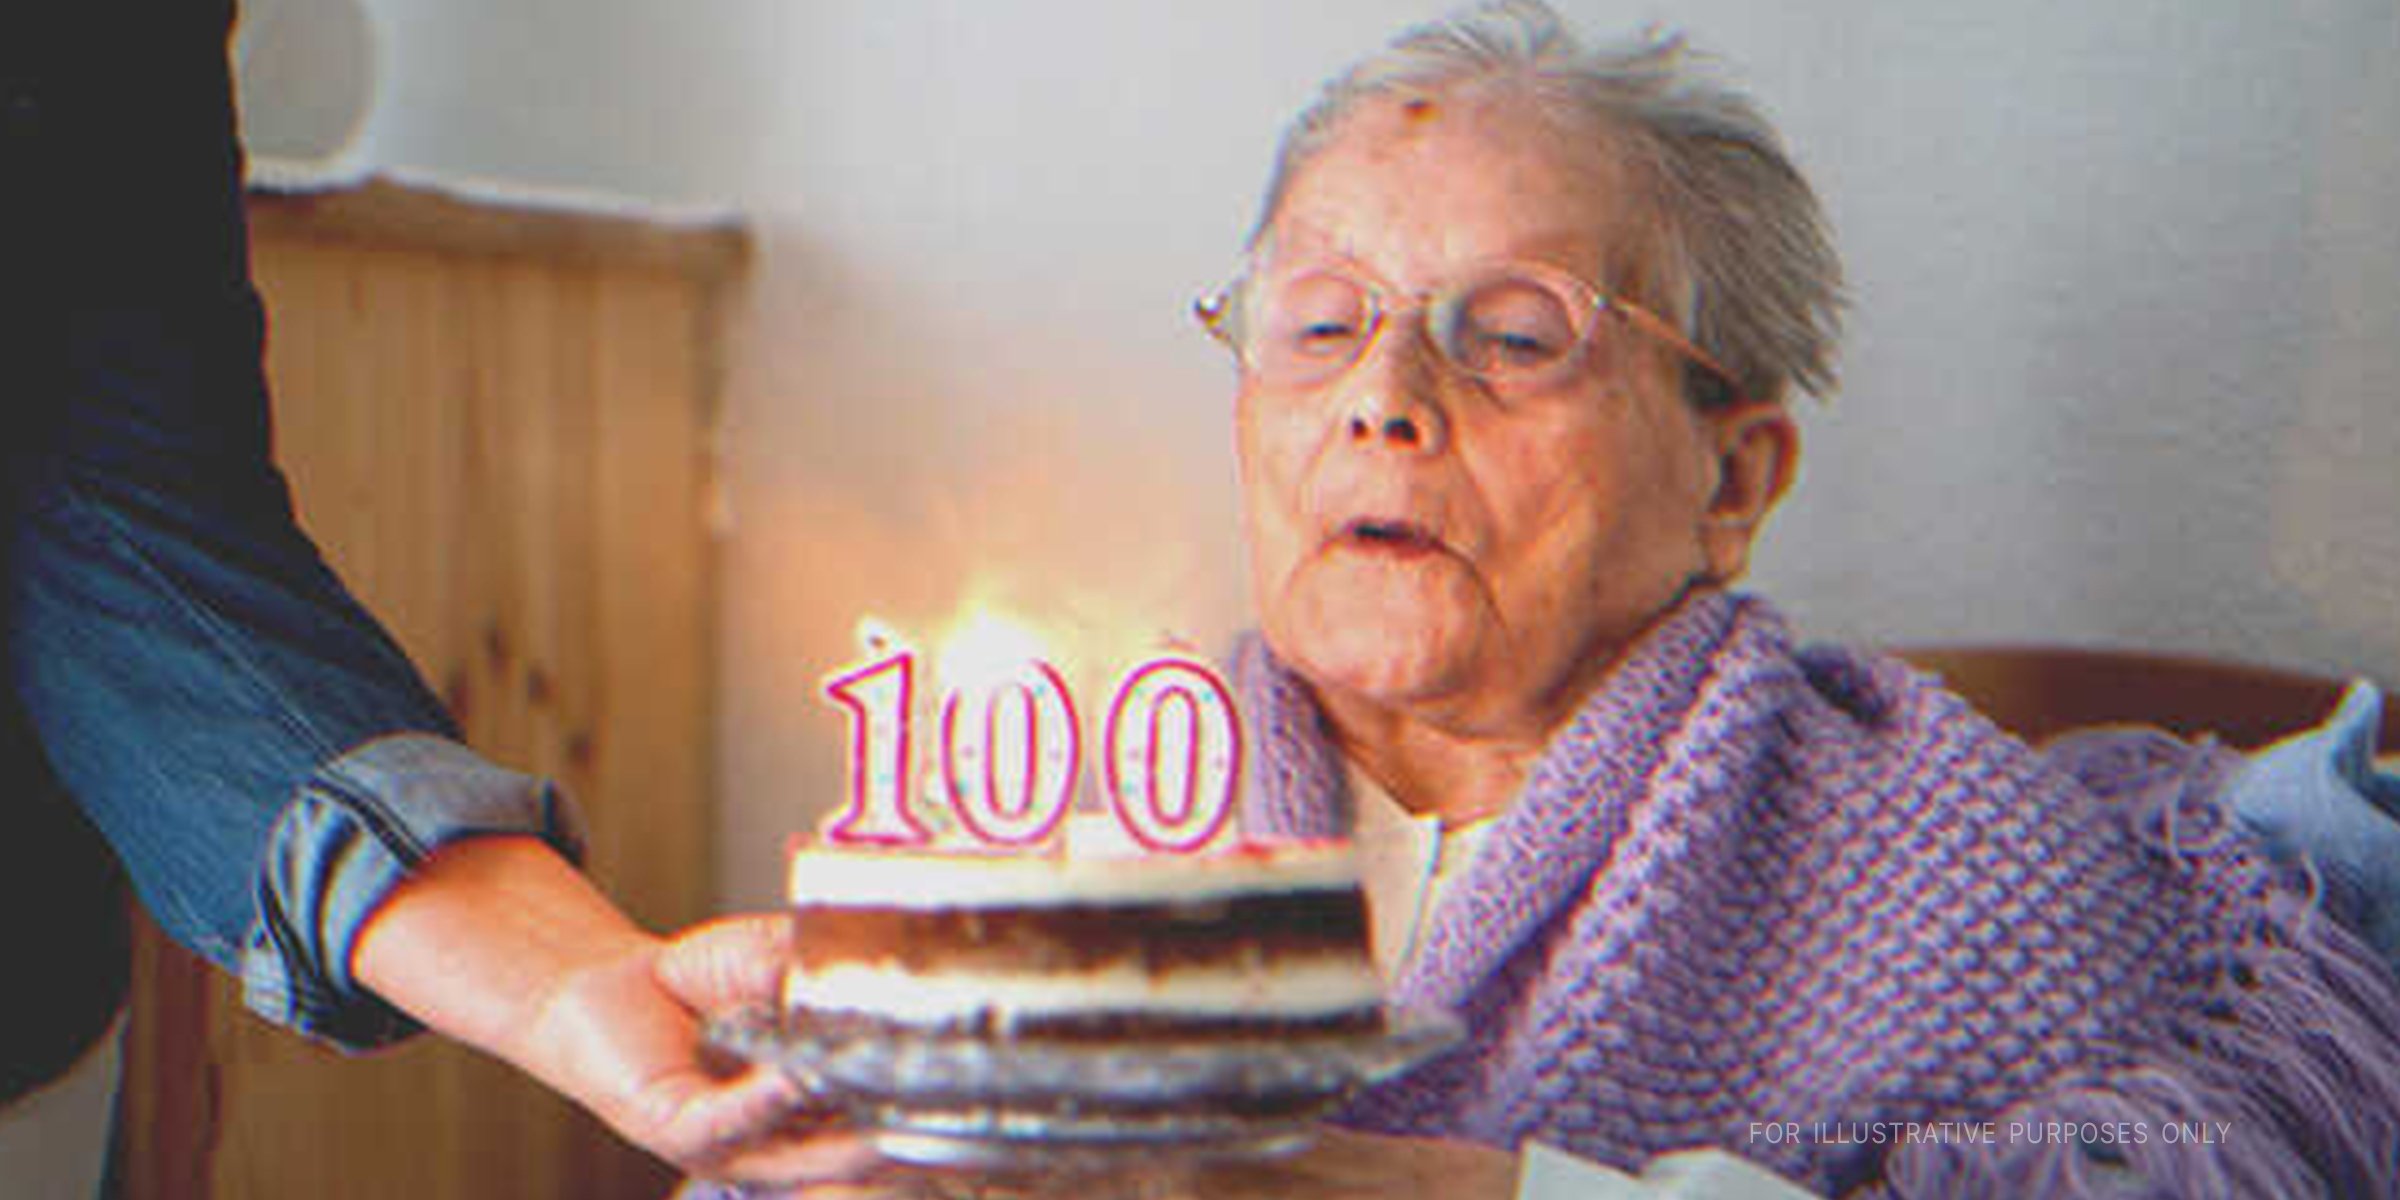 Older woman blowing birthday cake. | Getty Images